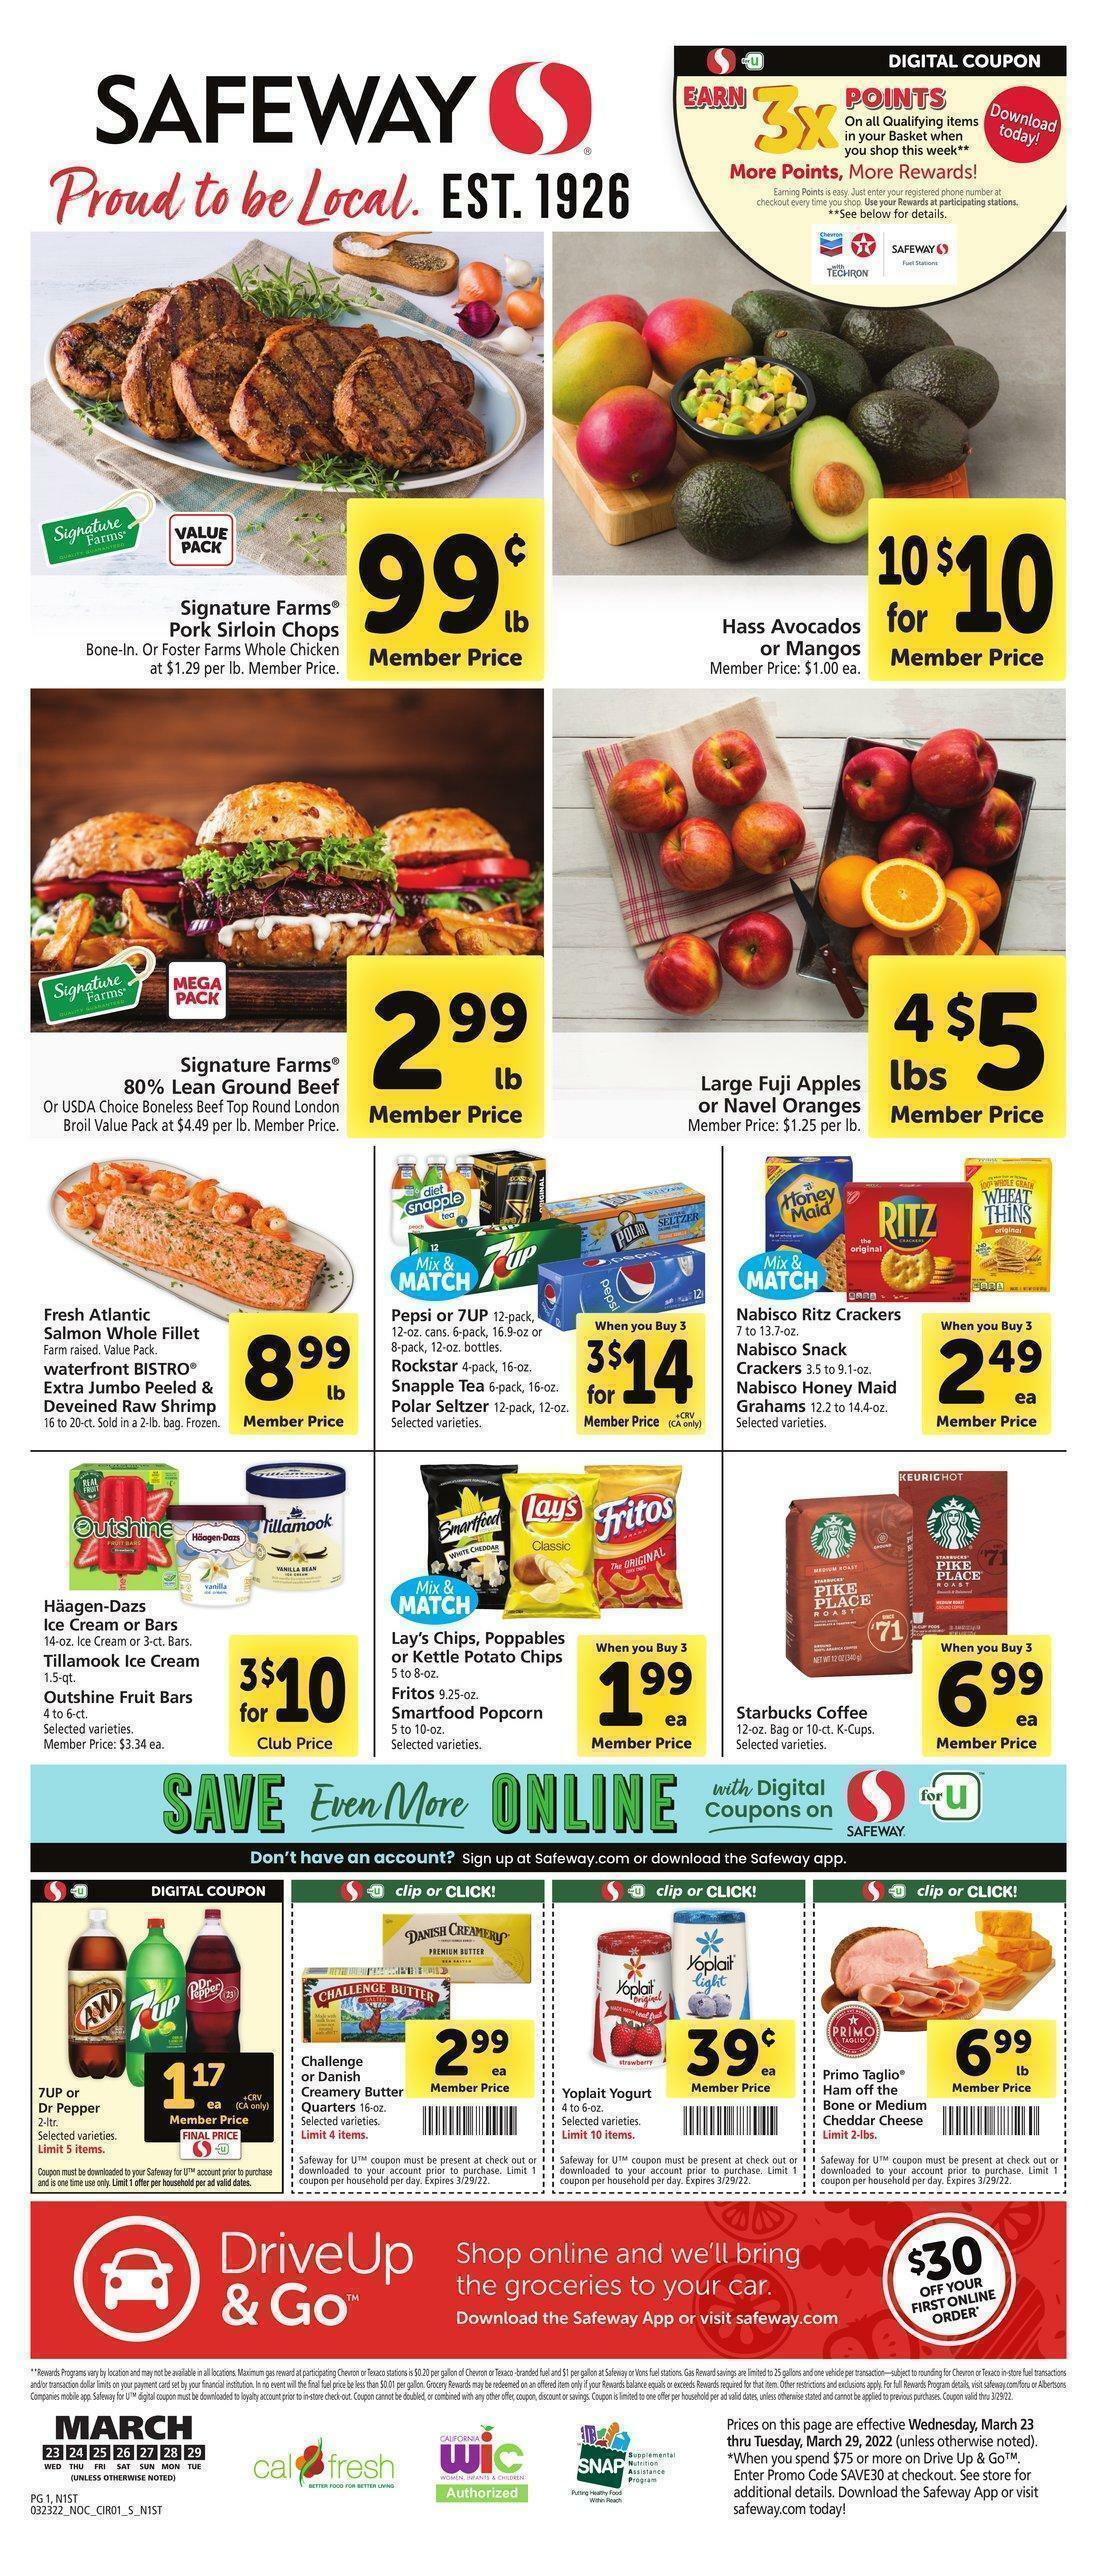 Safeway Weekly Ads & Special Buys from March 23